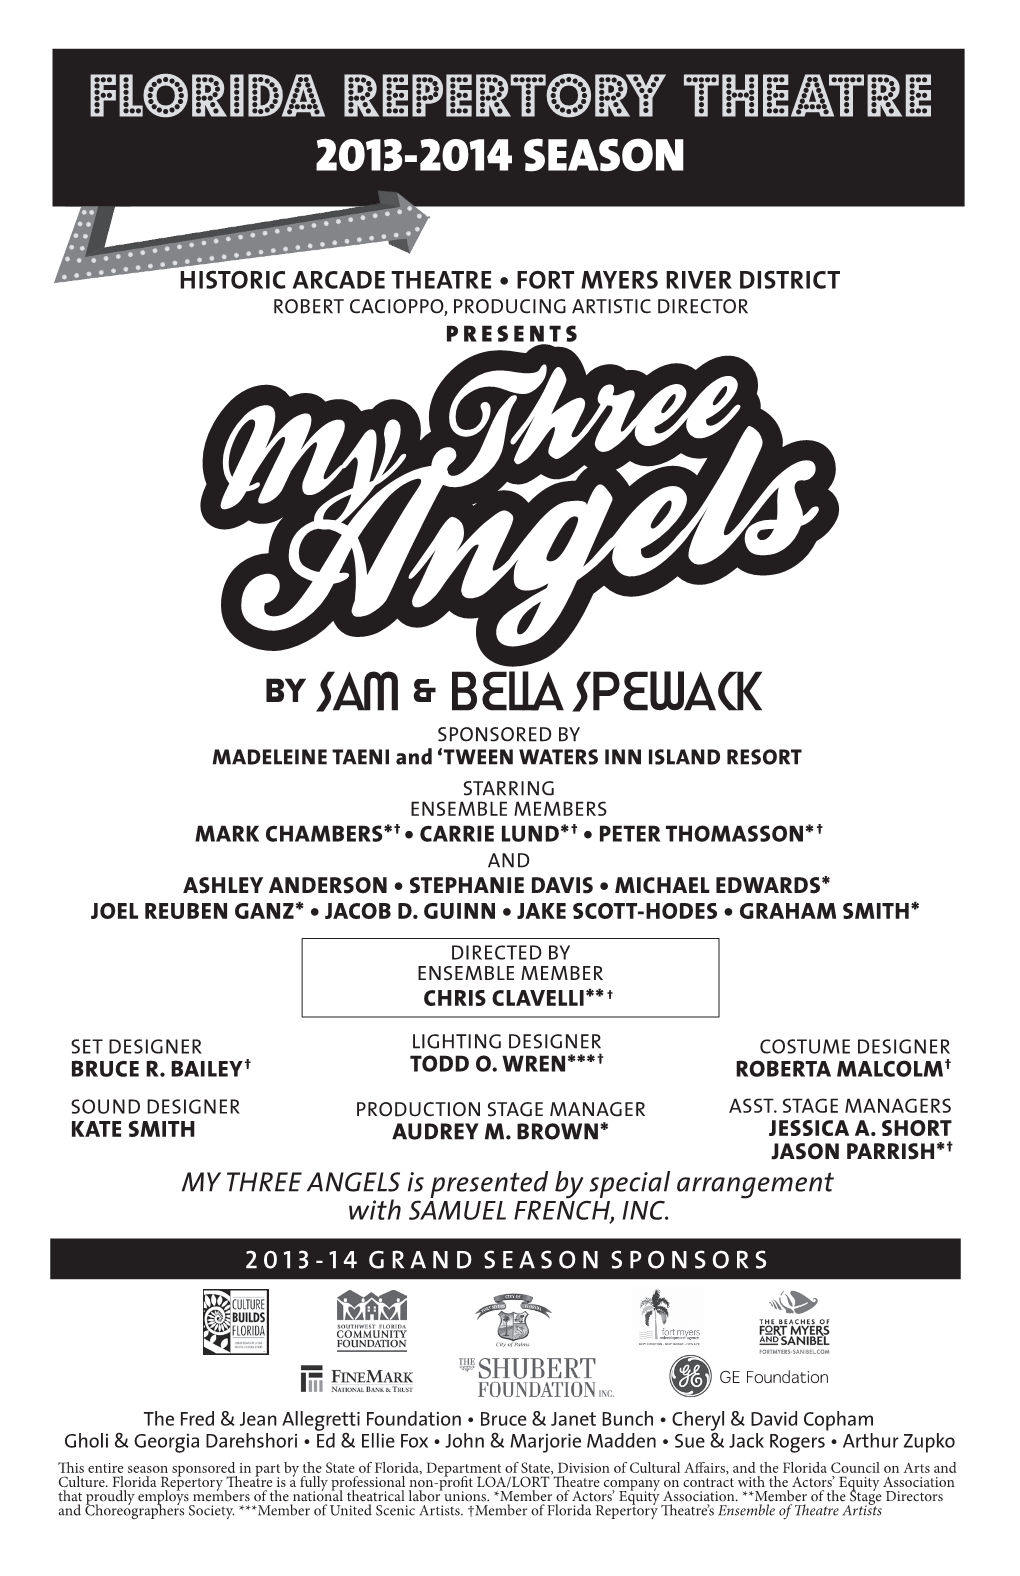 MY THREE ANGELS Is Presented by Special Arrangement with SAMUEL FRENCH, INC